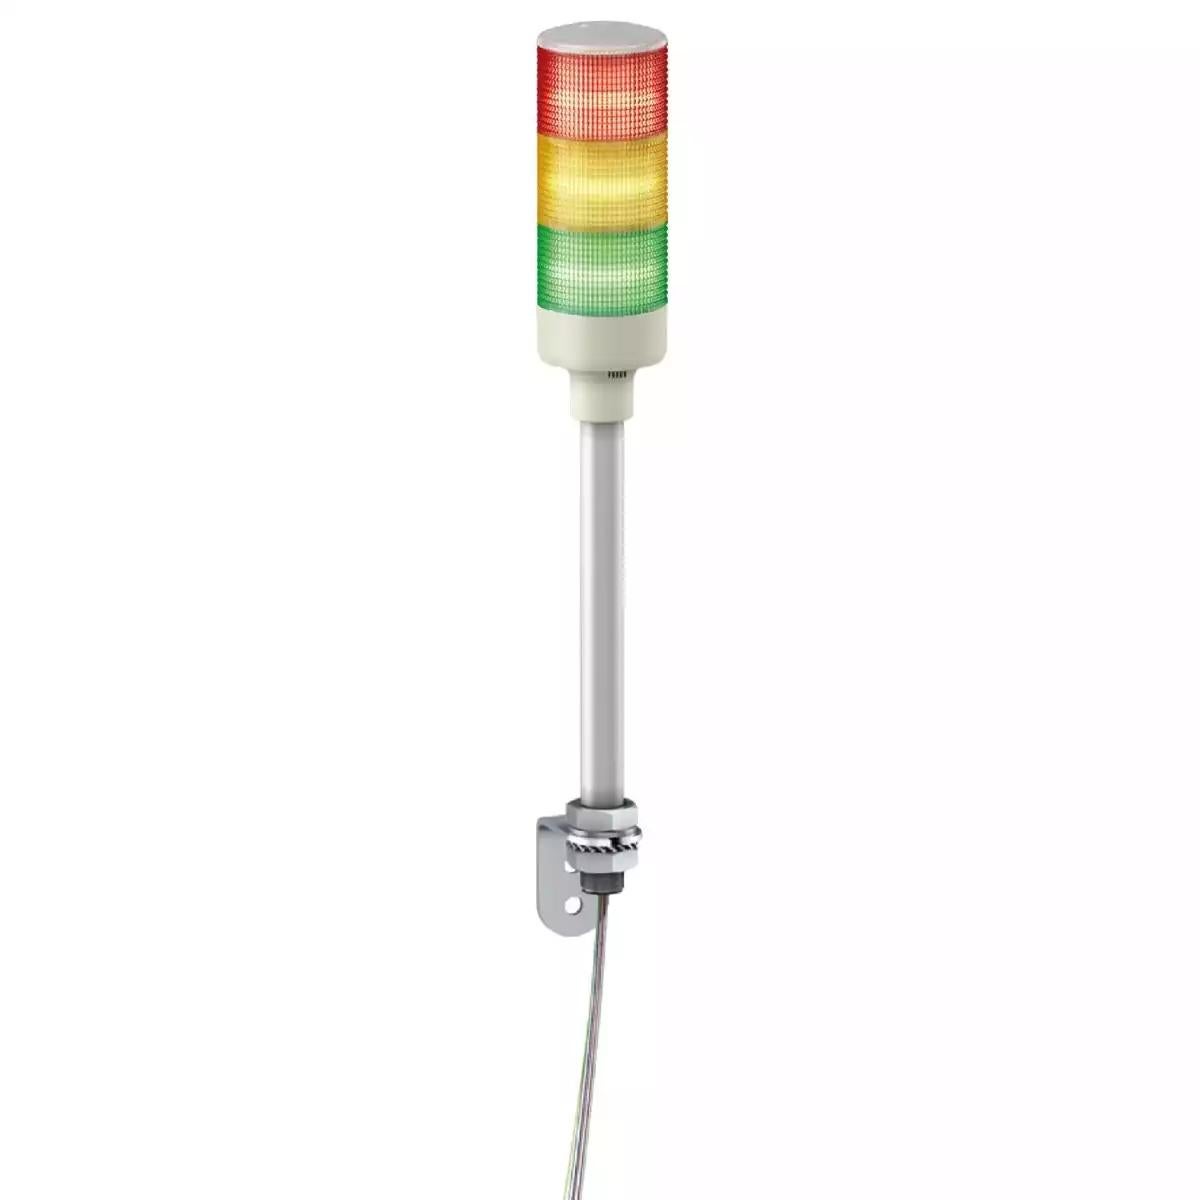 Schneider Electric Harmony XVG Tower Light - RAG - 24V - LED - Tube mounting with 